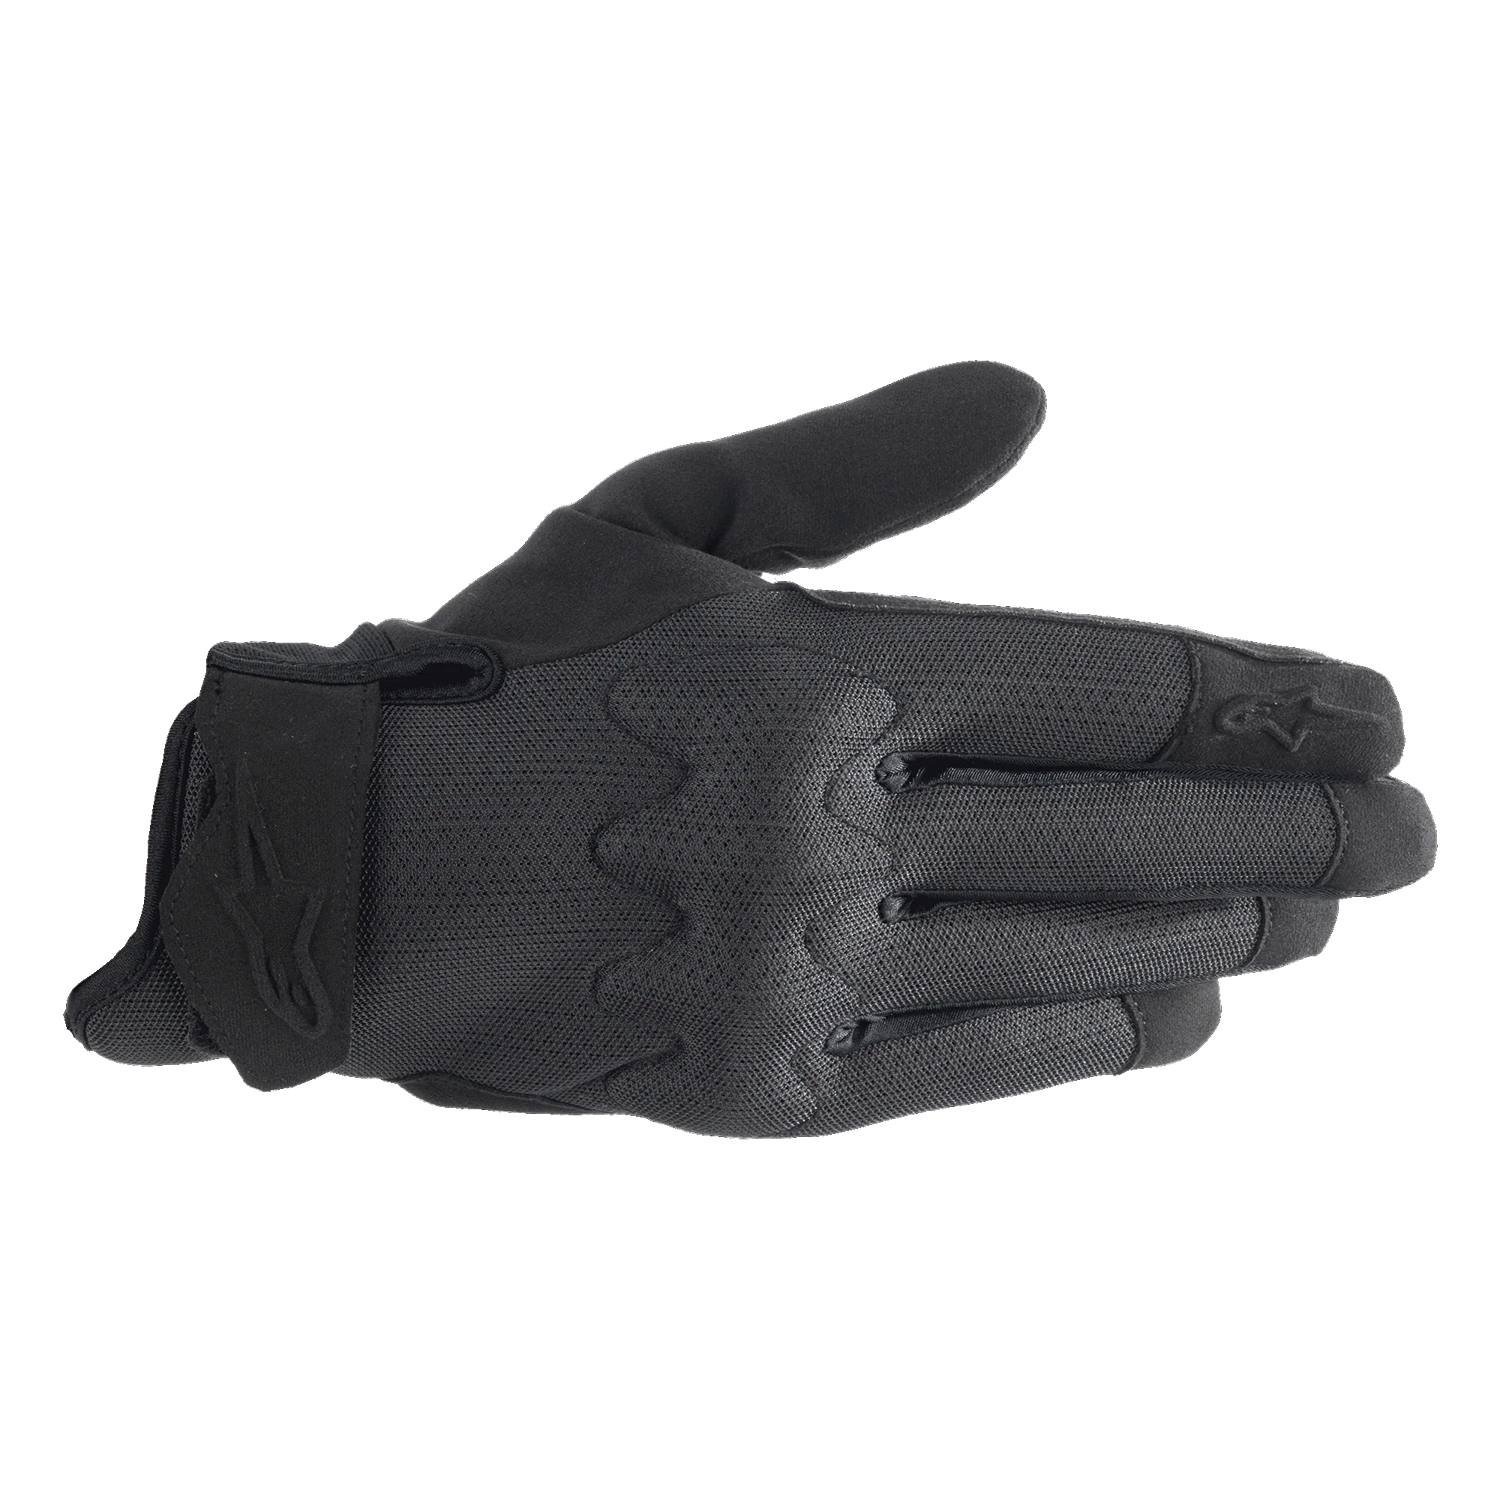 Image of Alpinestars Stated Air Gloves Black Size 2XL ID 8059347168623